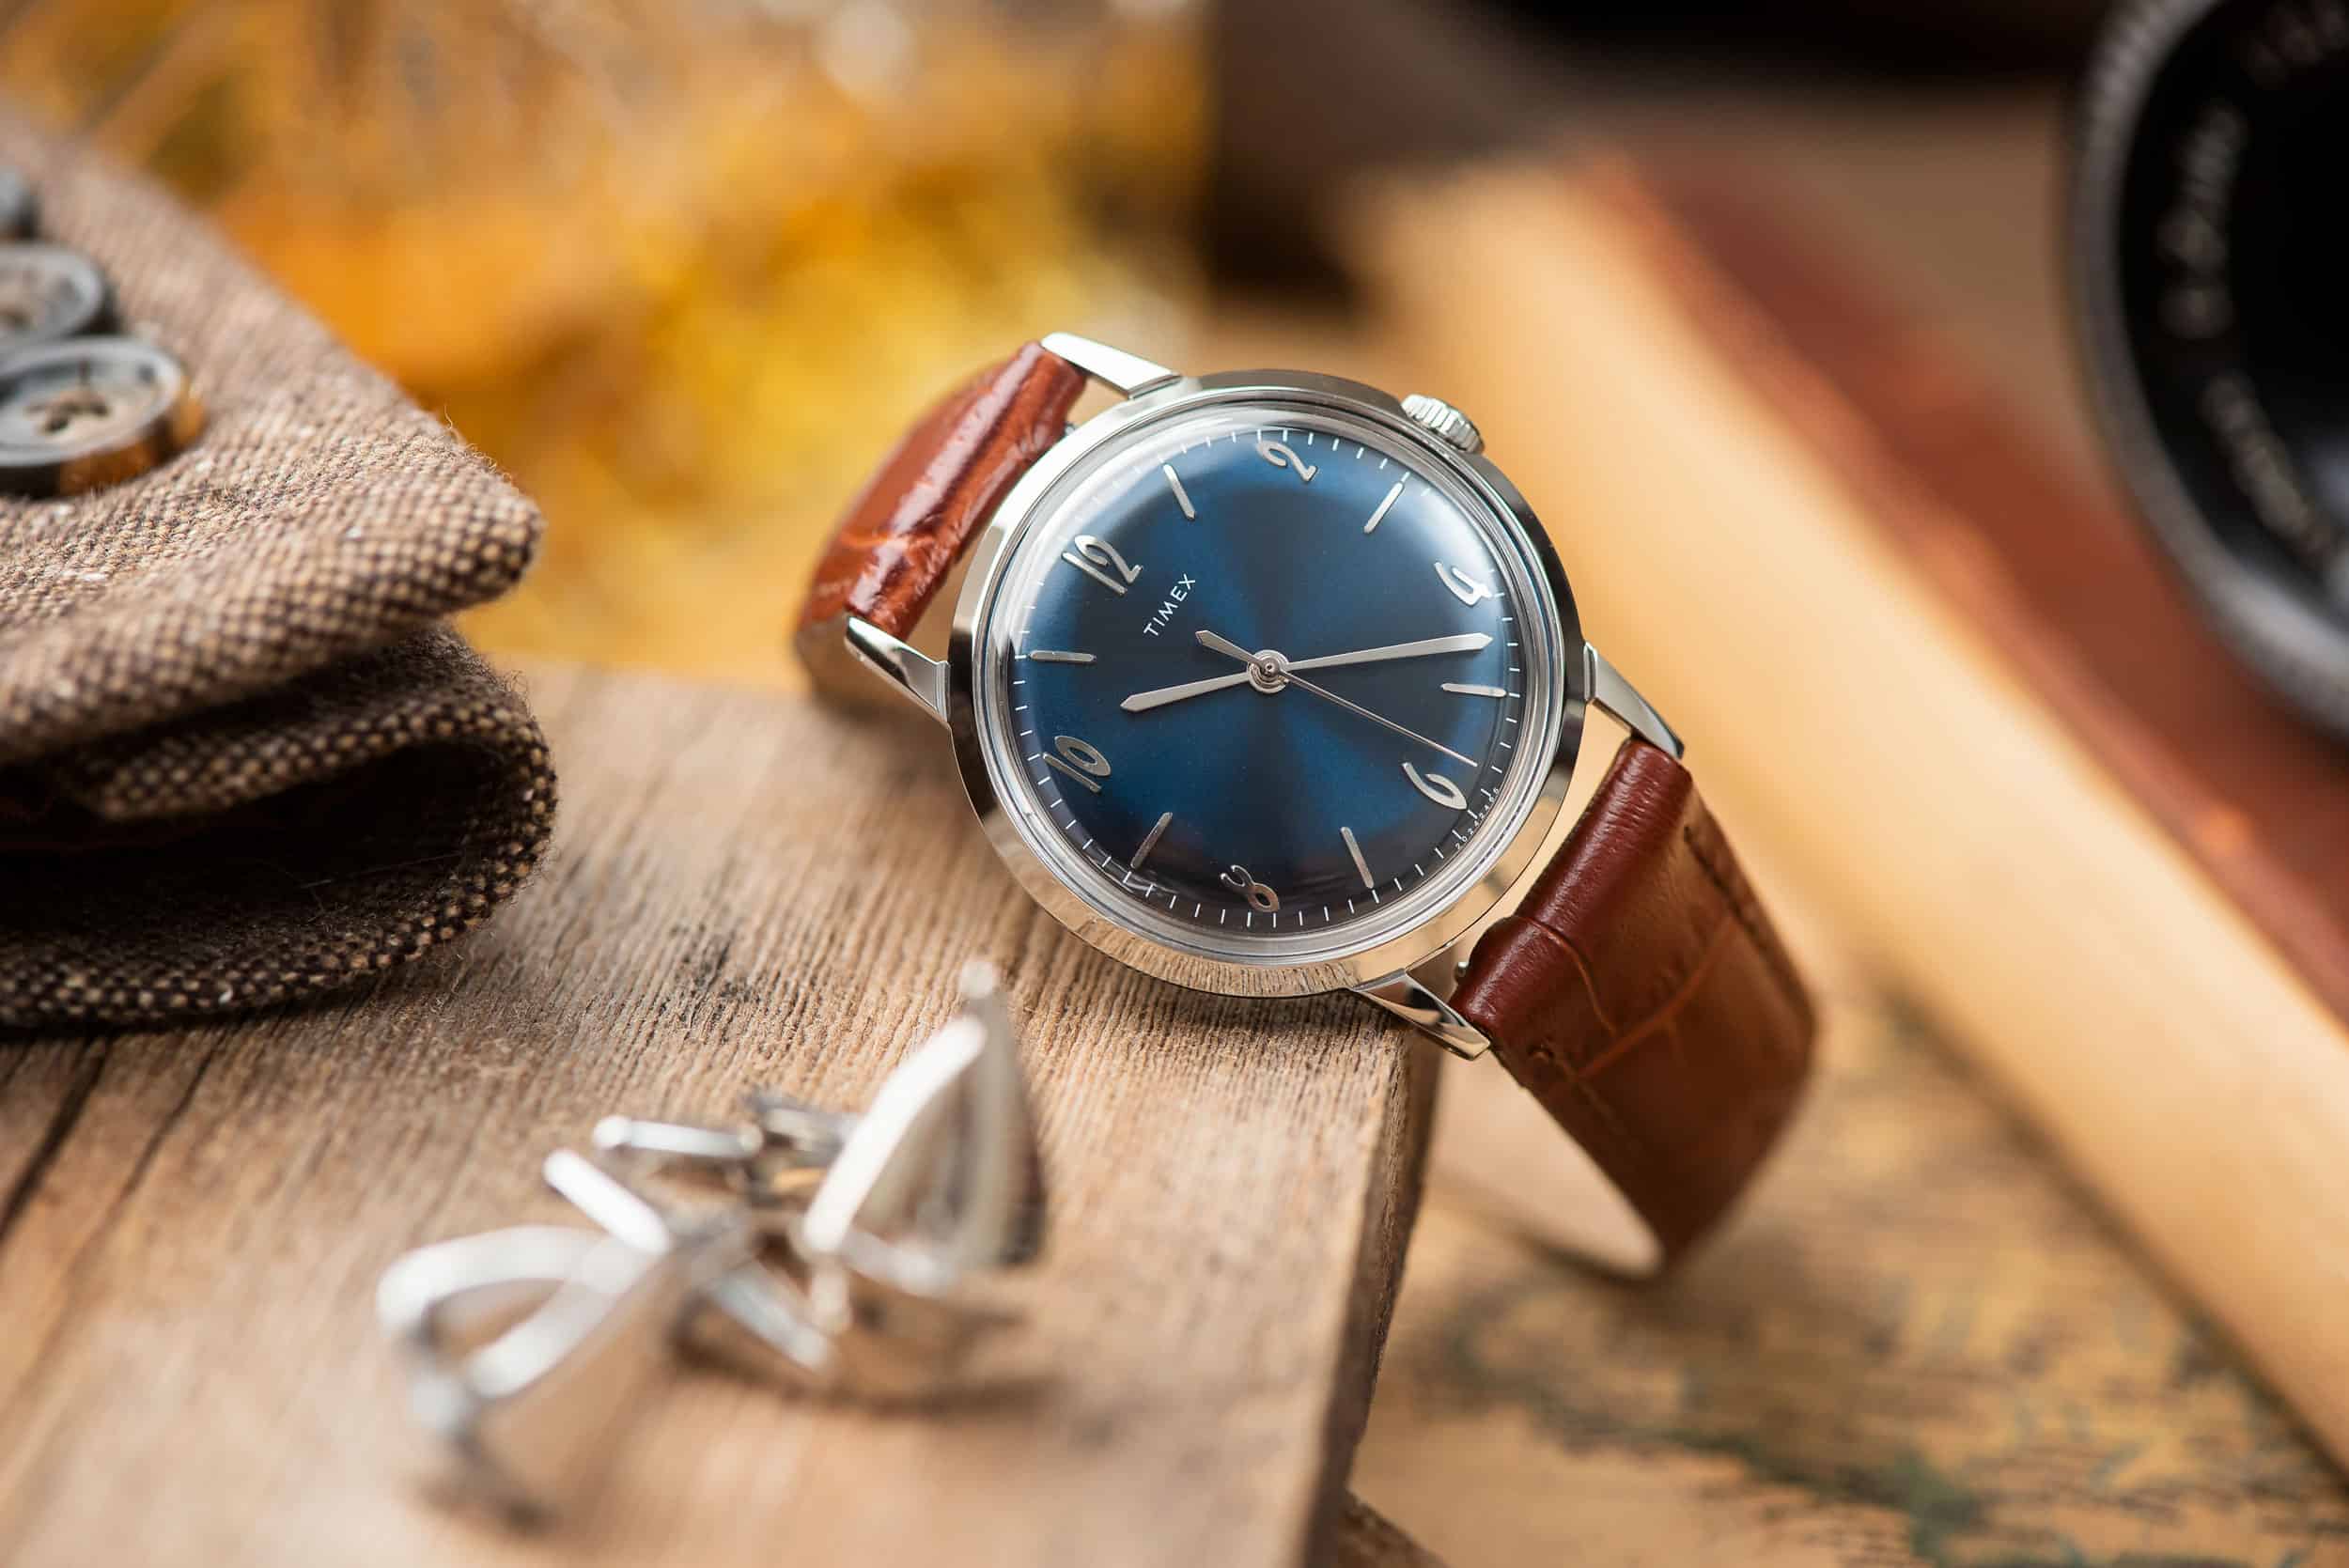 Iconic, Stylish, and Affordable Timex Watches – Now Available at the Windup Watch Shop